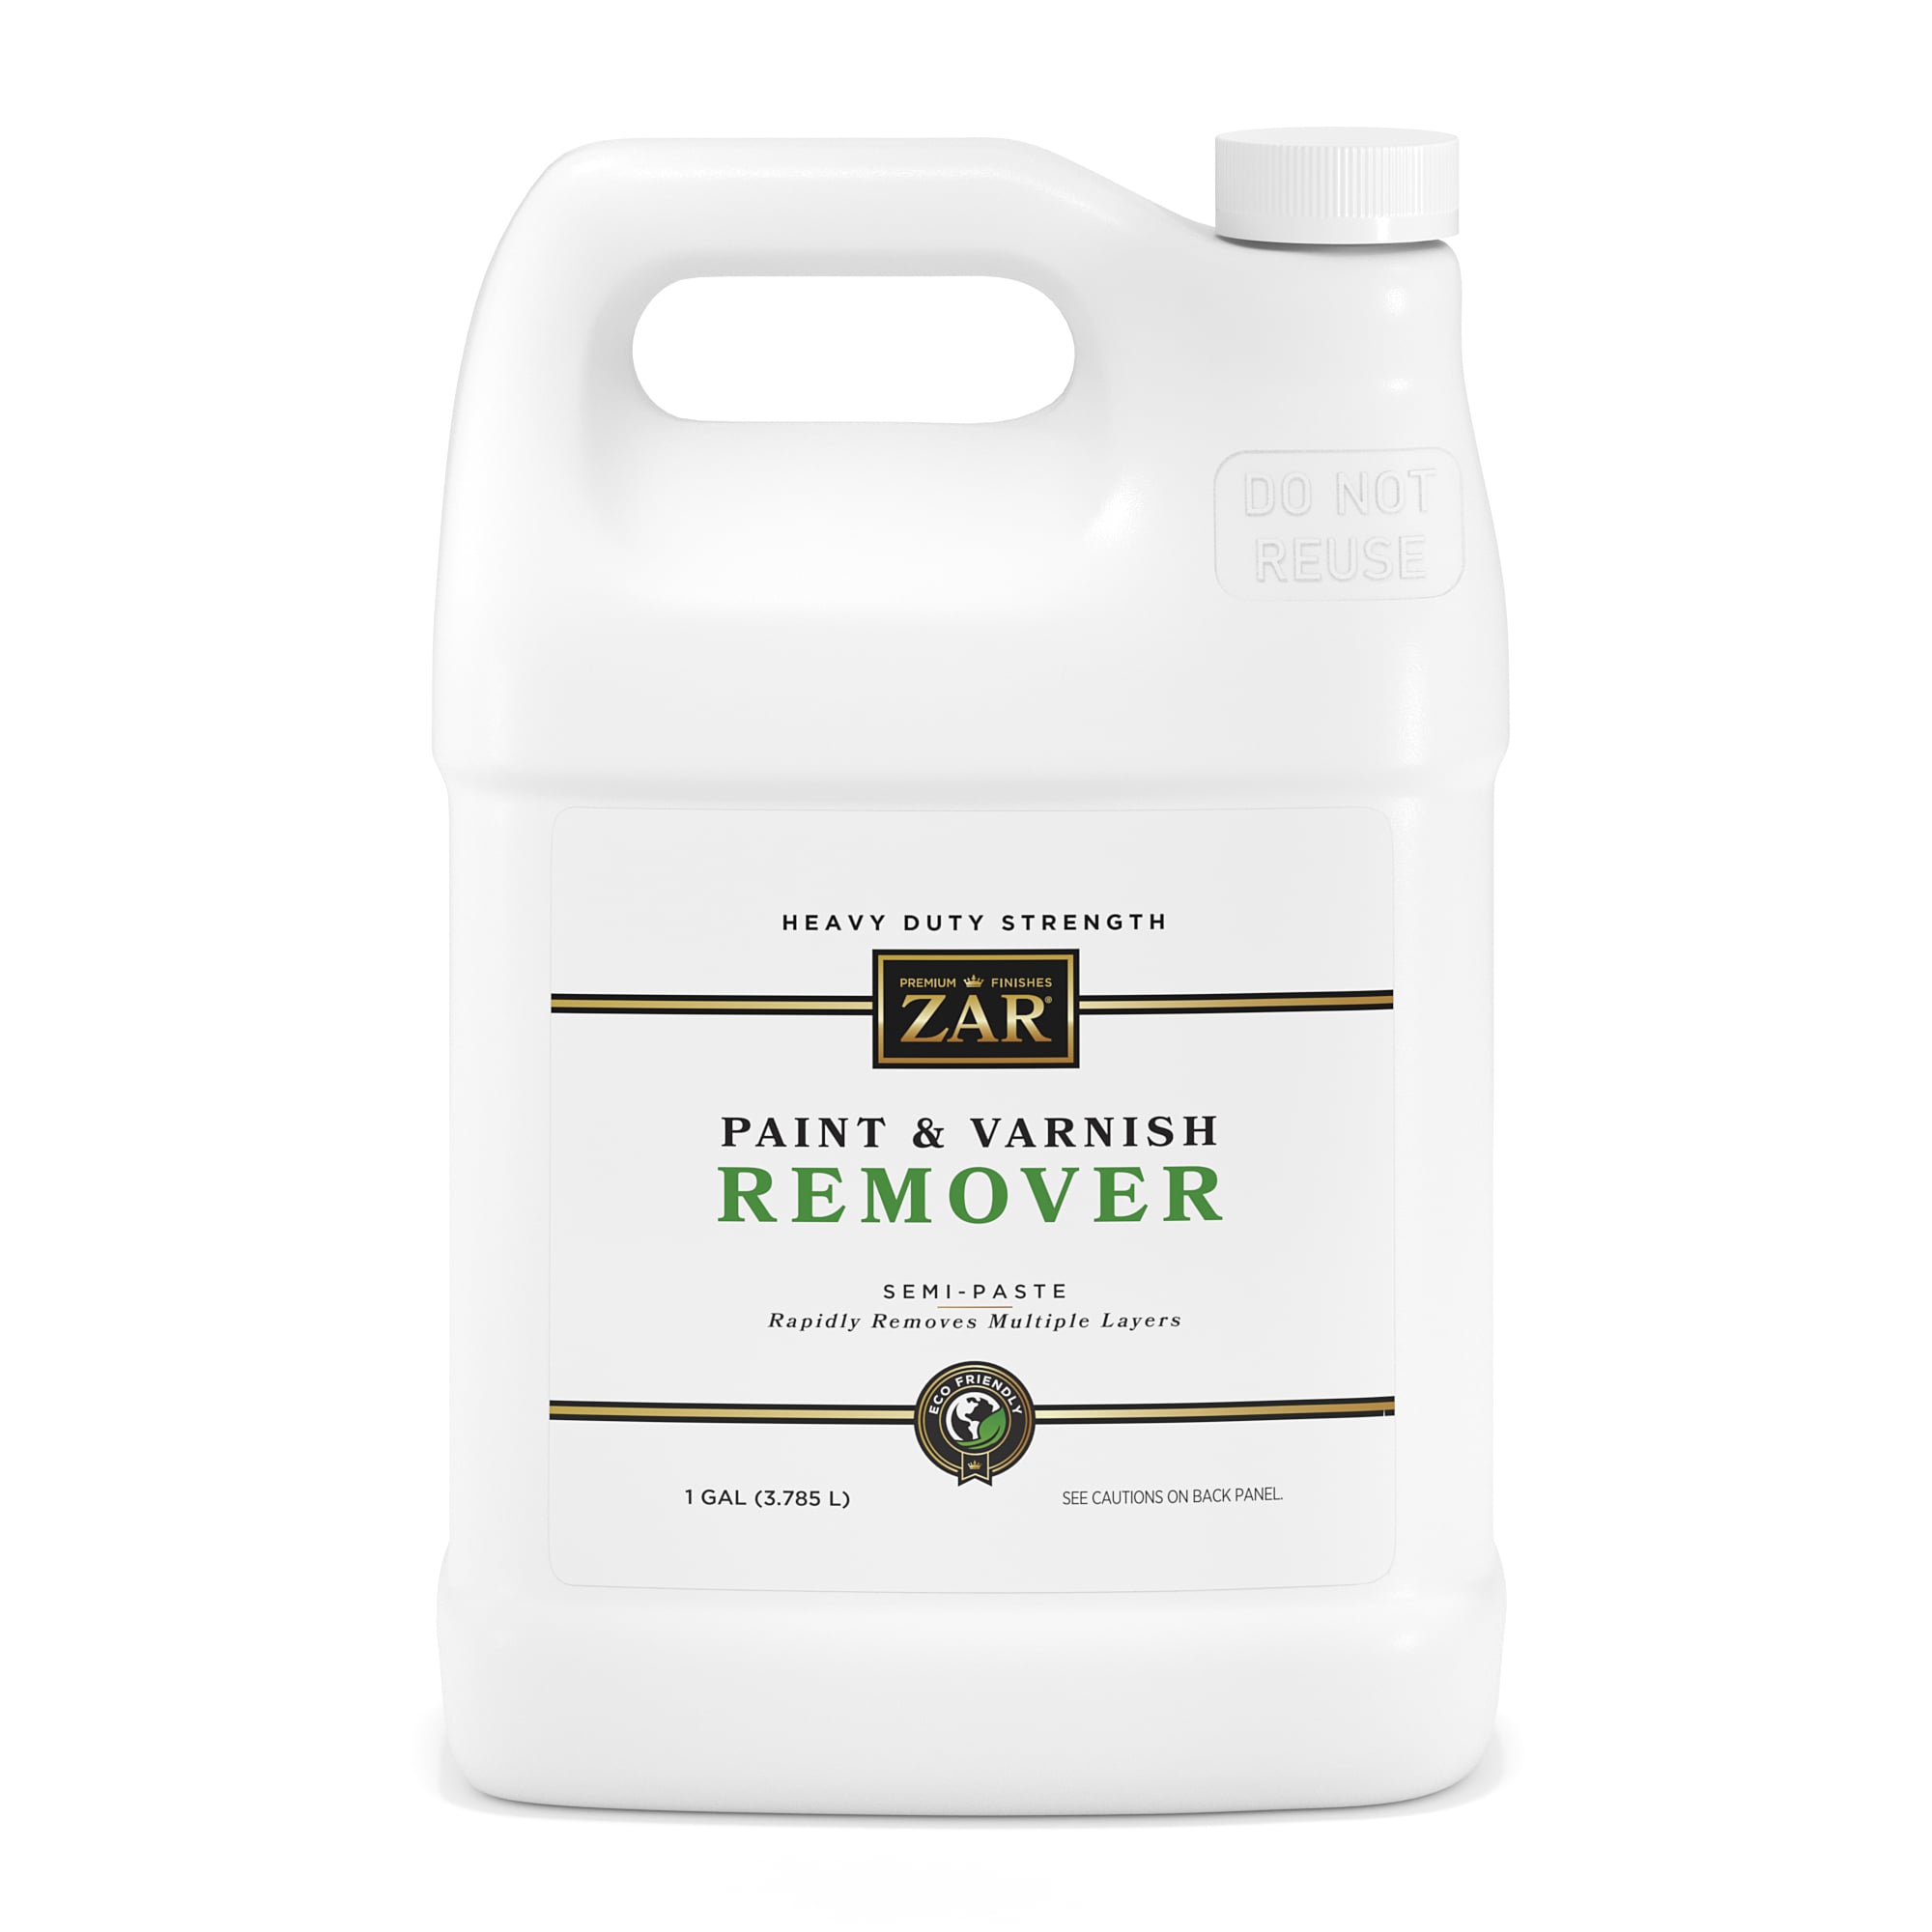 Painted paint remover - VITEX